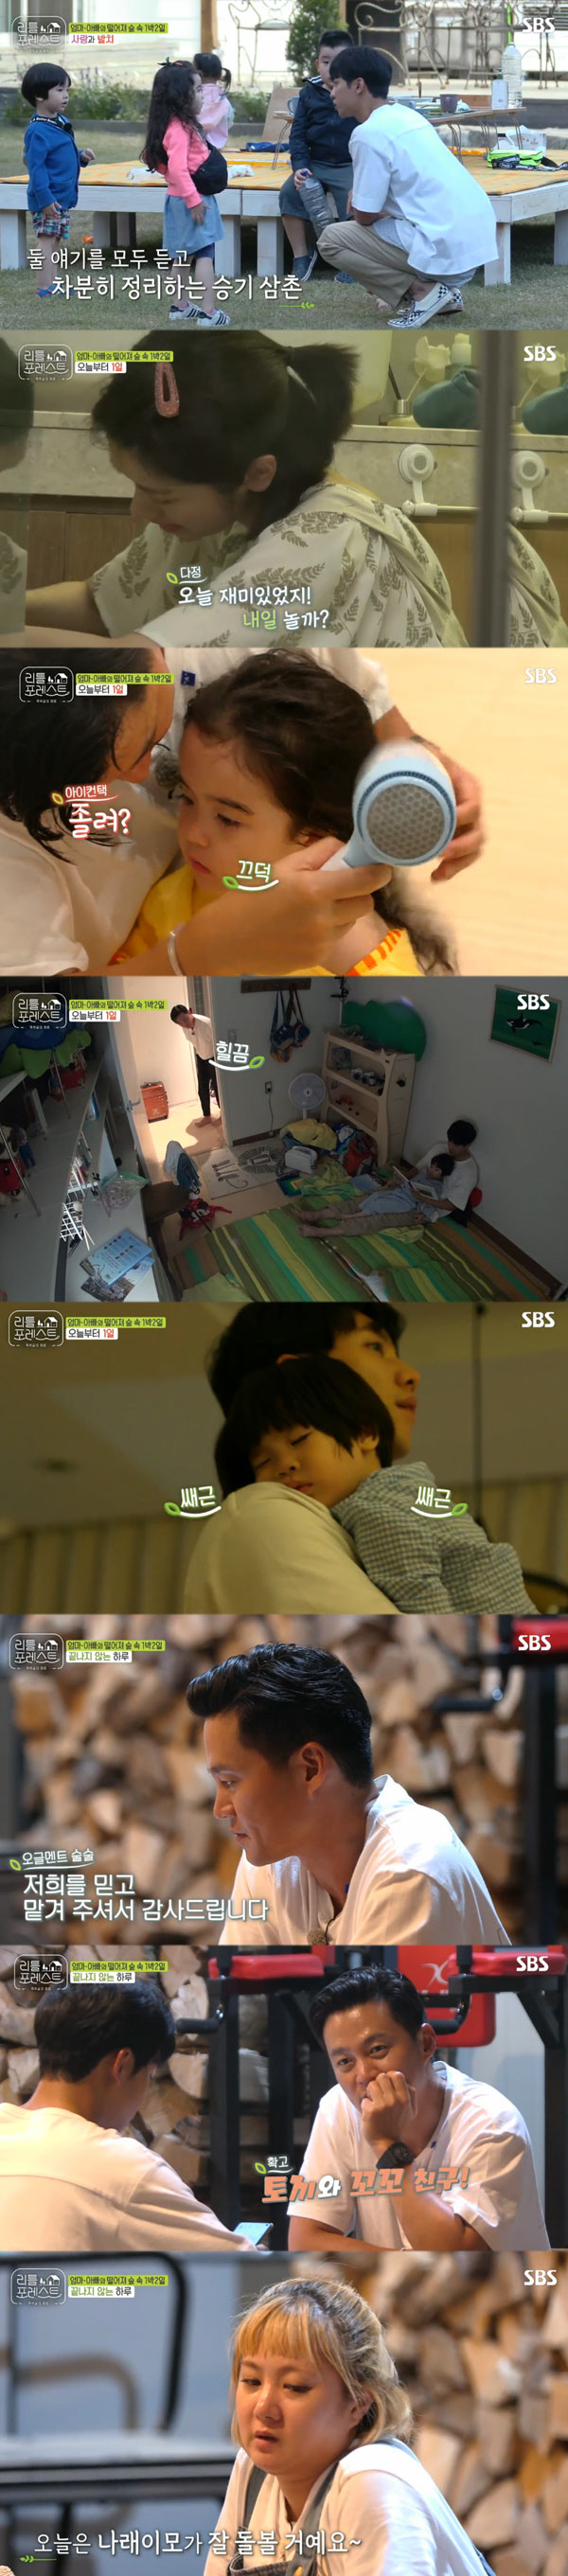 The members of Little Forest also grew up between the children.SBS Wall Street Entertainment Little Forest, which was broadcast on the 19th, jumped to the highest audience rating of 7% per minute (based on Nielsen Korea metropolitan area furniture) and received the eye mark of viewers.On this day, Little and the members who adapt to the nature of the bakgol were drawn.Among the little ones, the soil of the playground in the forest was unfamiliar, but soon it was falling into the dirt play, and the members were happy.However, as the play progressed, there were little people who wanted to go to the bathroom, and even worse, they found a toilet.Eventually Lee Seo-jin ran to pick up the toilet for Littles and laughed.Littles then went on to plant blueberries, among which Lee Han showed interest in shoveling, and Lee Seung-gi led the atmosphere by direct shoveling.Grace, who also sampled blueberries directly, said, Lets give as much water as we eat, Lee Seung-gi said, If you give a lot of water, the tree will bloom.Park Na-rae also began to understand the minds of Little, saying, Lets go because I am ashamed when I am a tree.In addition, there was a strange intimacy between the members and the Littles in the Tjakbangol. Jung So-min received the Confessions from Little Eatle.Eugene told Jung So-min, I like my aunt, and Jung So-min was happy to say, Its a heartache.Lee Han embraced Lee Seung-gi, who was cute jealous of Eugene, and expressed his intimacy, and he expressed interest in Brooke.Park Na-rae persuaded Lee Han-yi, who was not going to eat, that Brook would like it, and Lee Han-yi showed off the storm food when Brooke came.Lee Seo-jin smiled relieved and pleased when the hamburger steak prepared for the Littles was responding well.Meanwhile, Lee Seung-gi found Lee Han-is shaking teeth.Lee Han had trauma at his feet, but Lee Seung-gi and Park Na-rae, who confirmed the condition, persuaded Lee to say, If you can not eat meat tomorrow, you can not eat meat tomorrow.Lee Han-i, who was in trouble, said, I will shake it out. However, Lee Seung-gi, who was anxious, challenged his feet, but Lee Han-yi immediately shouted and failed.Since then, the night of the night has come and the members have divided their roles and started to prepare for bed.Lee Seo-jin, a soaked child, dried the heads of wet children, smoked mosquitoes all over the place, and Lee Seung-gi turned into a all-round carer by reading fairy tale books for children who were not sleepy.Littles went to the dream country with their eyes closed little by little in the members efforts.Finally, the members gathered in the workshop and sent home correspondence to each parent, who informed the children of Haru along with the pictures of Little, and the parents thanked the members for their pride.The scene soared to 7 percent of the audience rating per minute, taking the best minute.